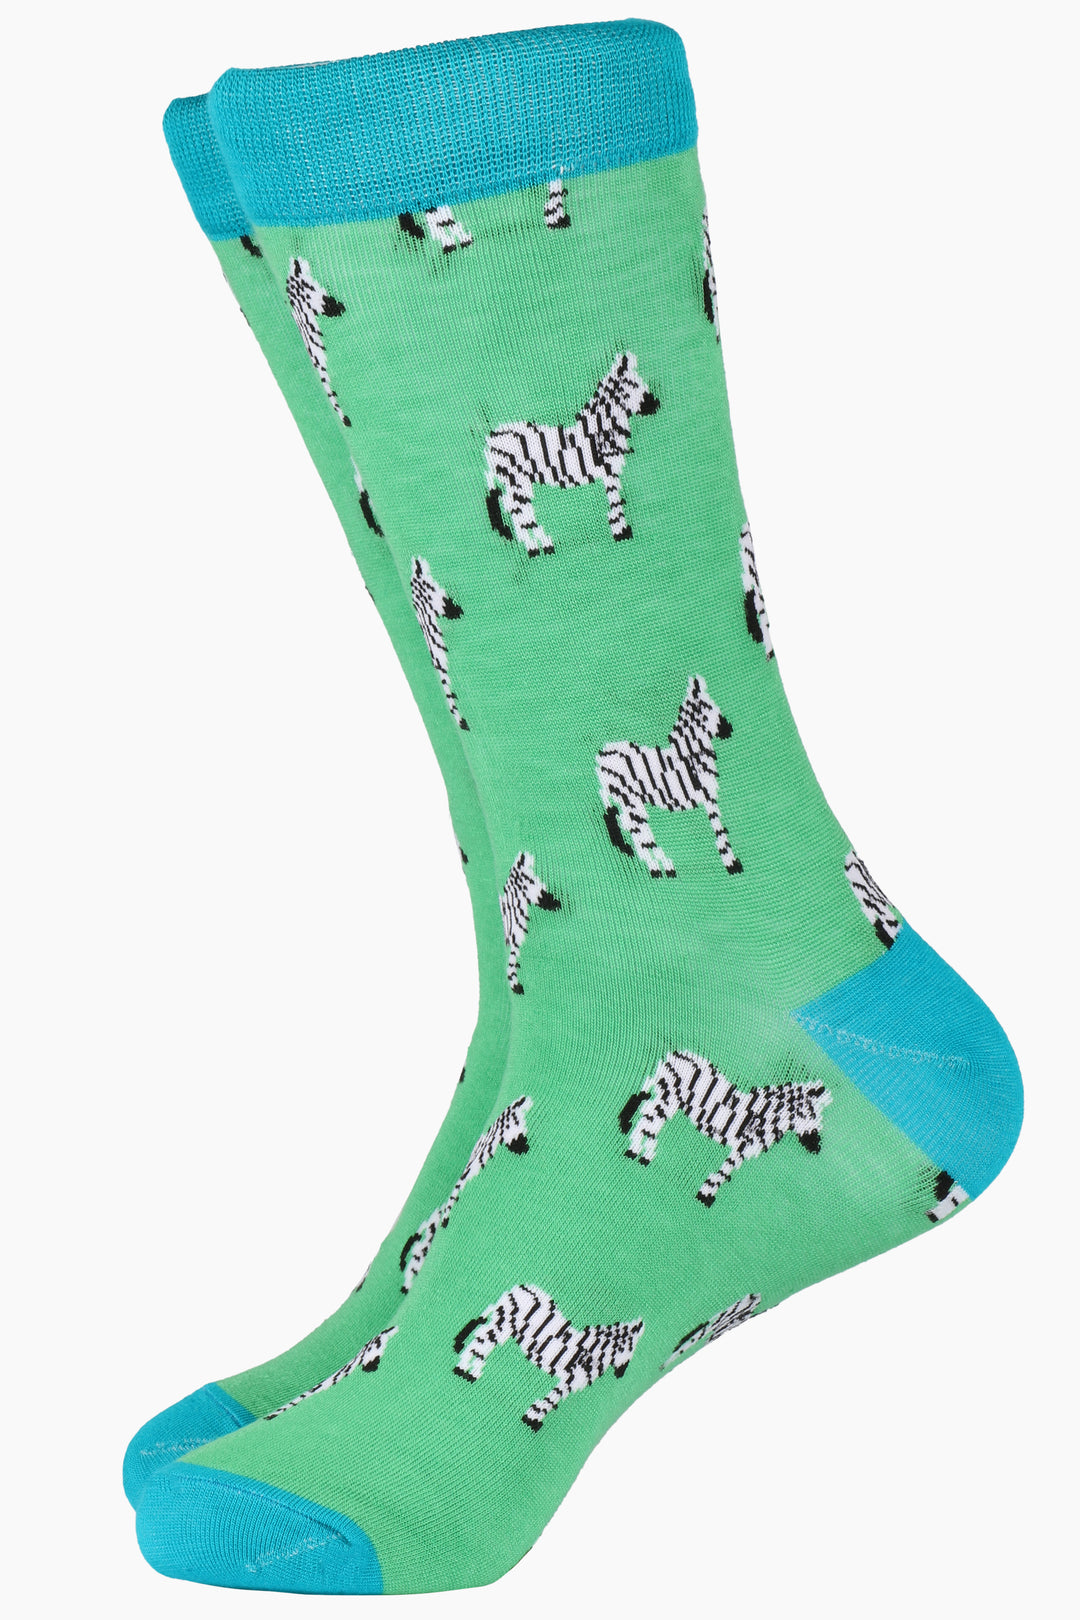 green bamboo socks with blue toe, heel and cuff with an all over pattern of black and white zebras